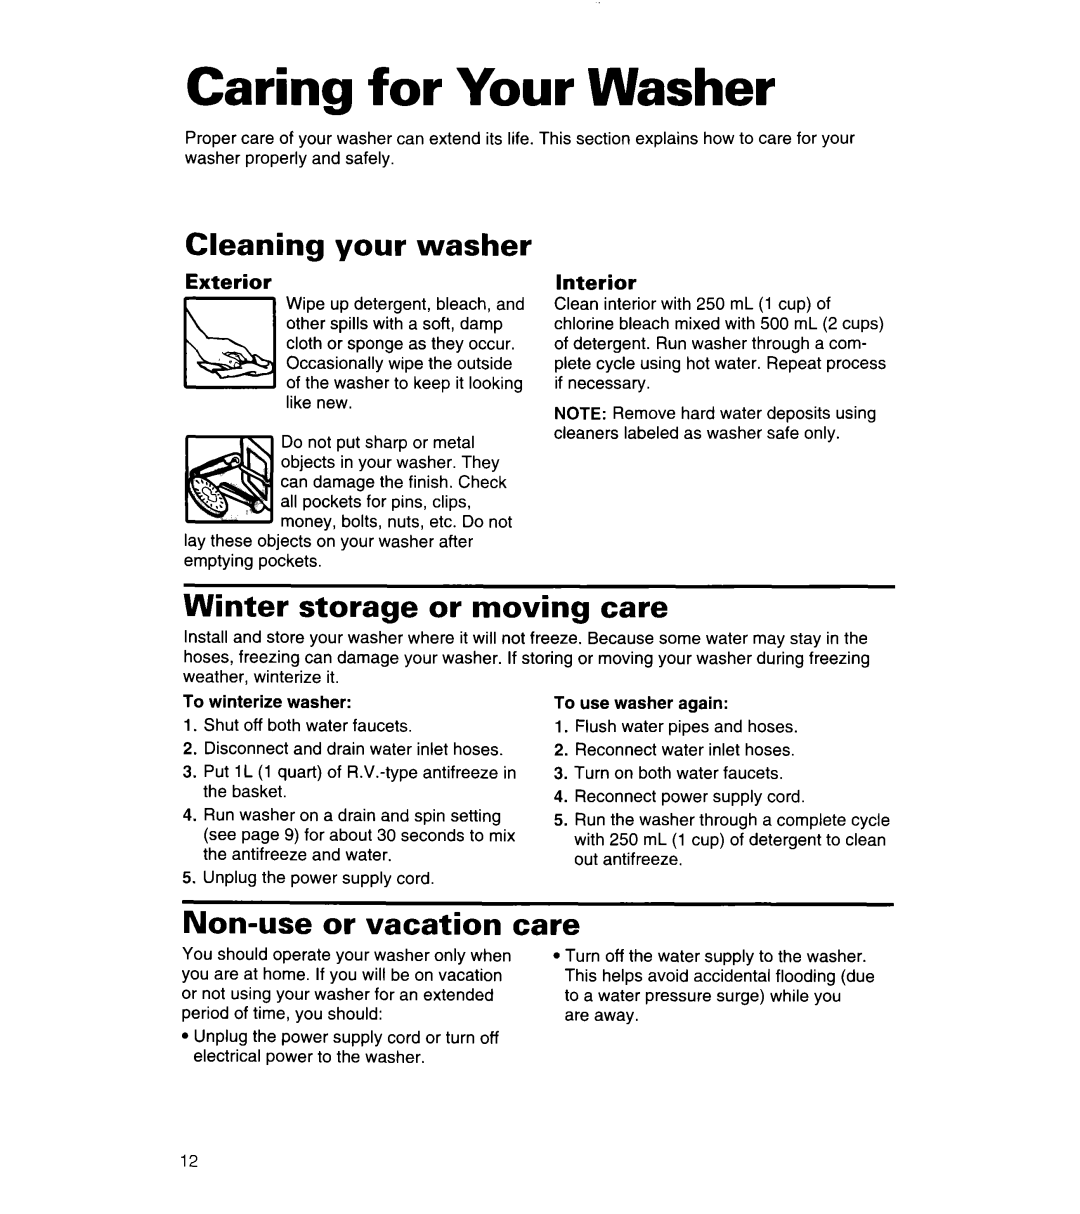 Whirlpool 3360464 Caring for Your Washer, Cleaning your washer, Winter storage or moving care, Non-use or vacation care 